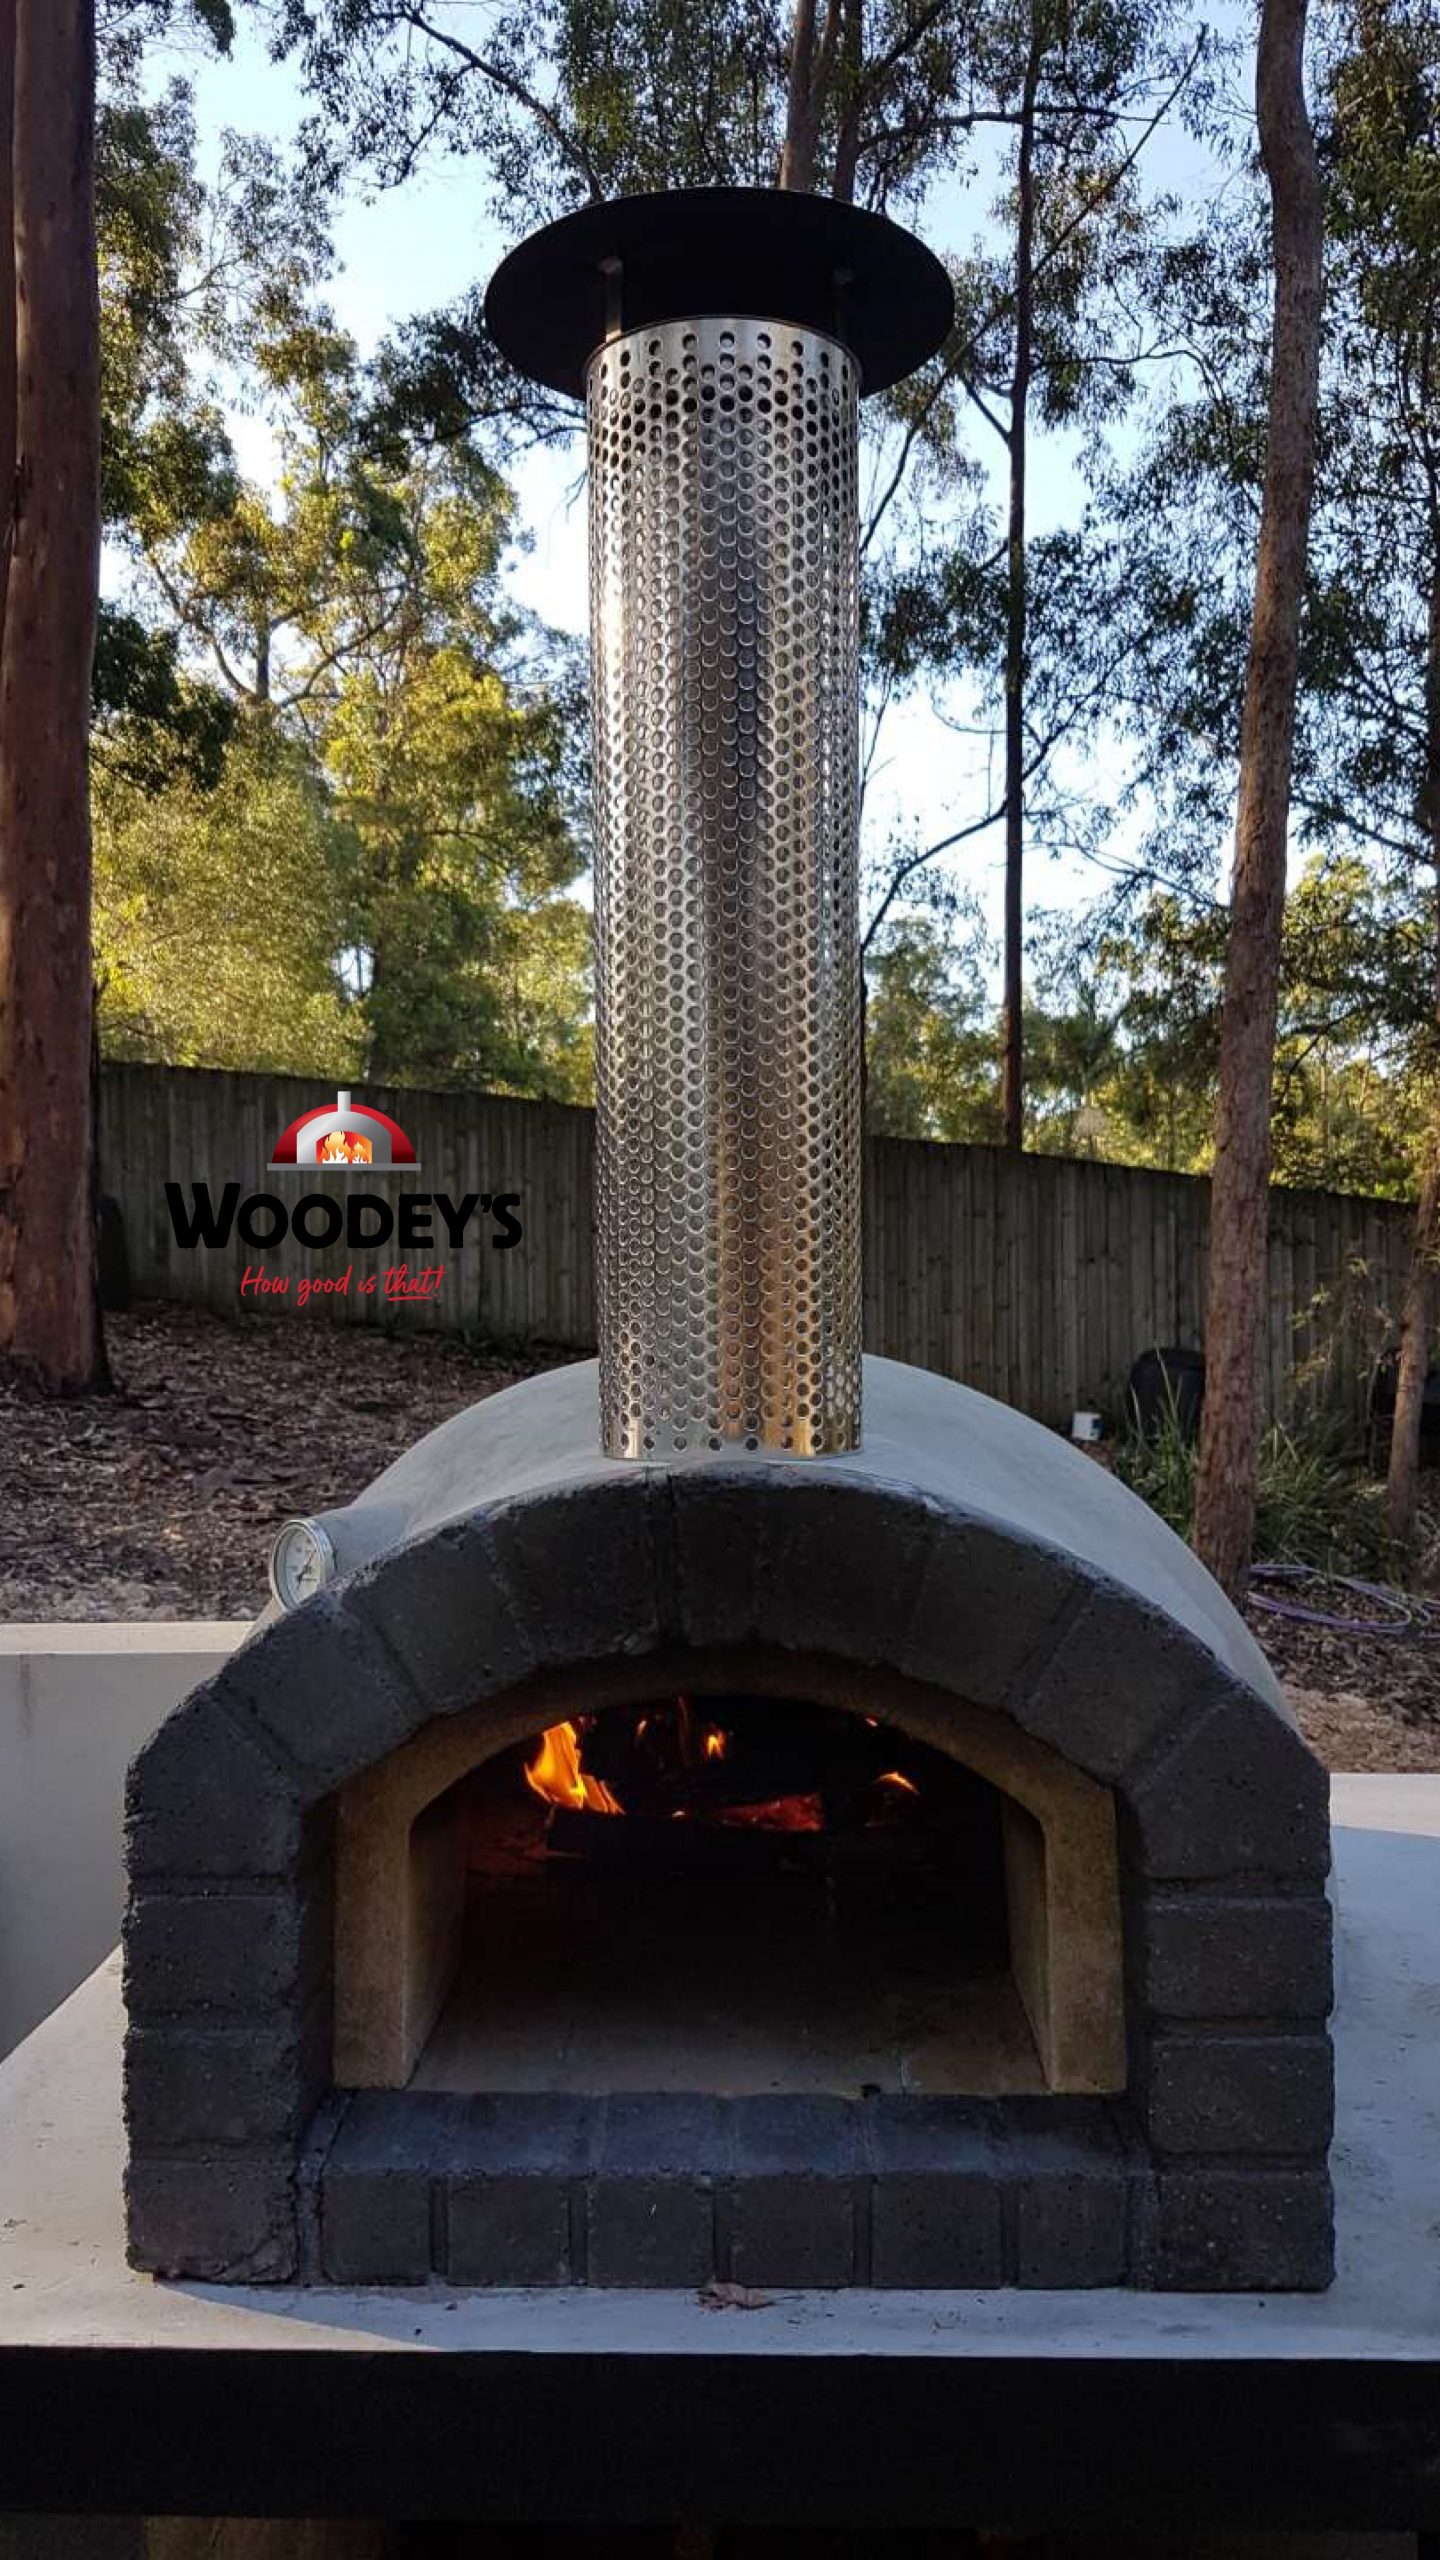 Woodfired Pizza Oven with Brick Arch Front and Stainless Steel Heat Shield